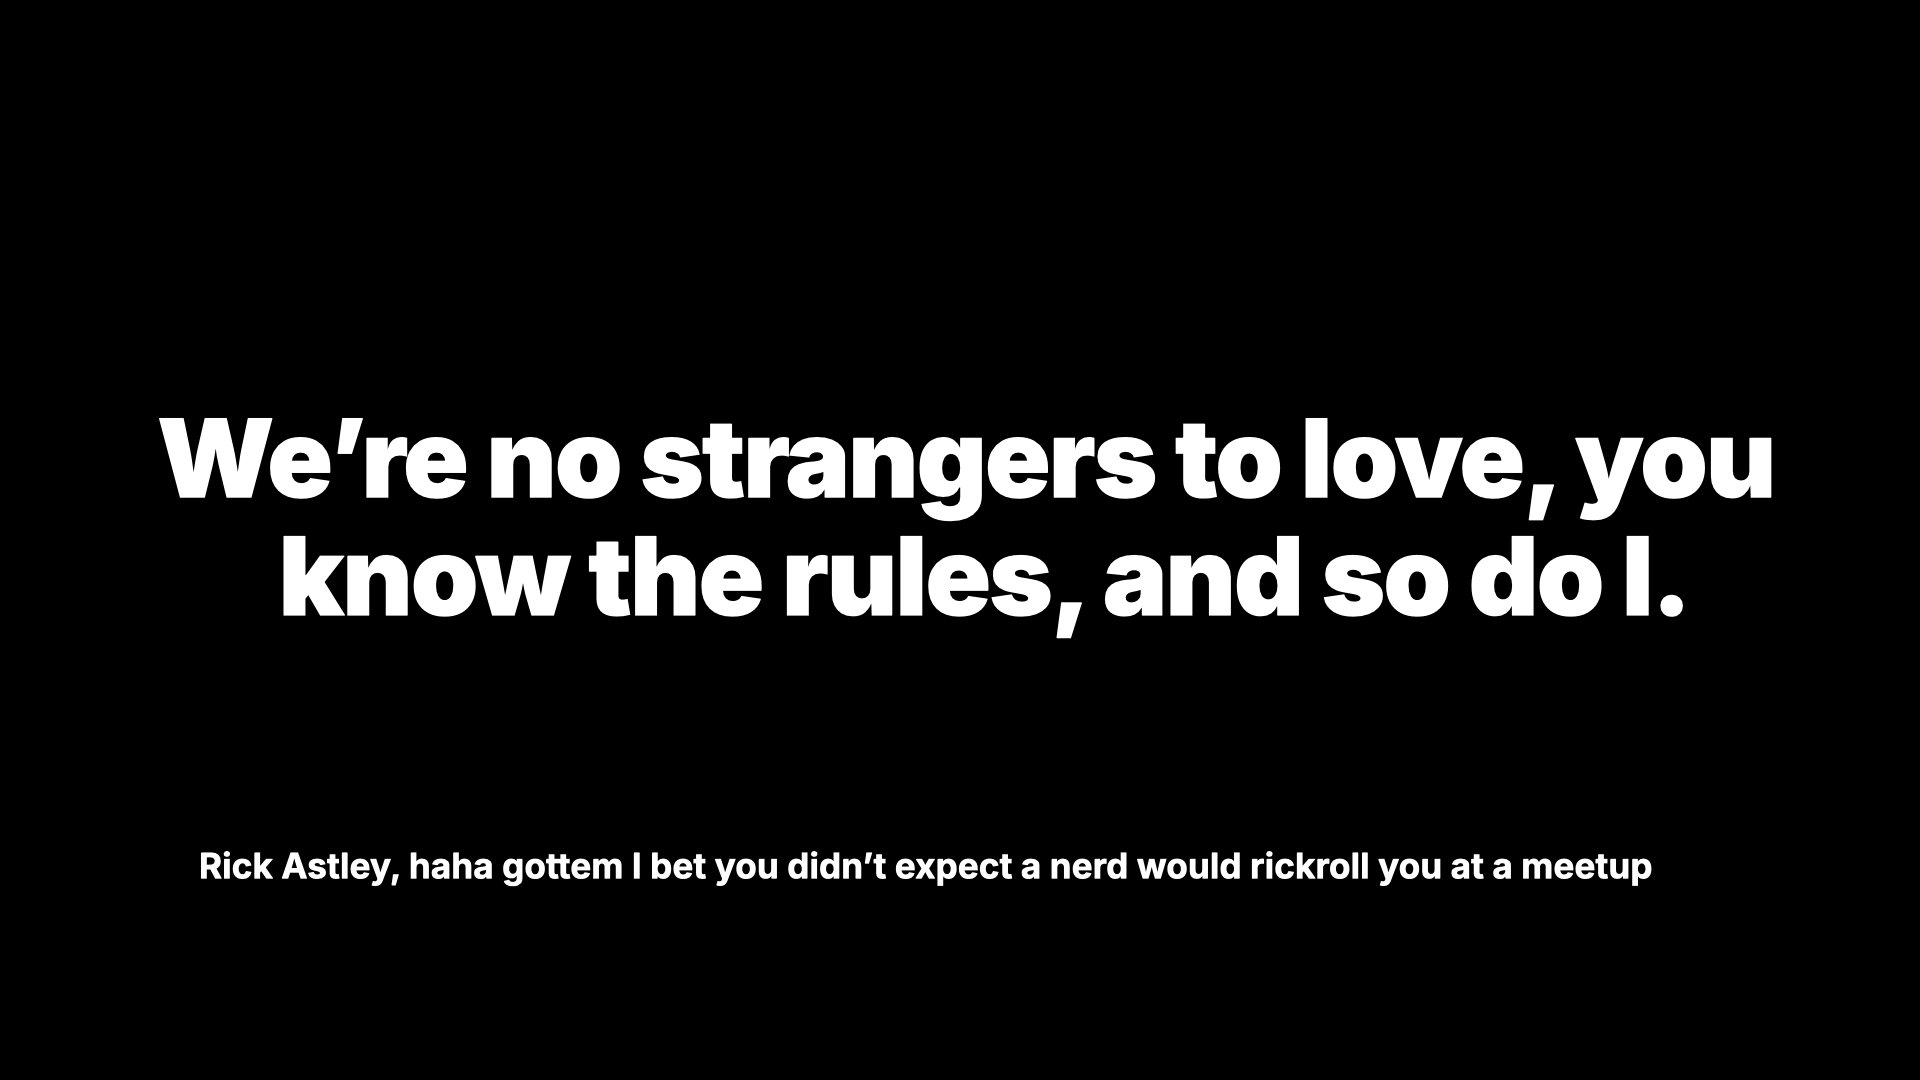 The sentence 'We're no strangers to love, you know the rules and so do I' in large bold letters with the citation of 'Rick Astley, haha gottem I bet you didn’t expect a nerd would rickroll you at a meetup'.